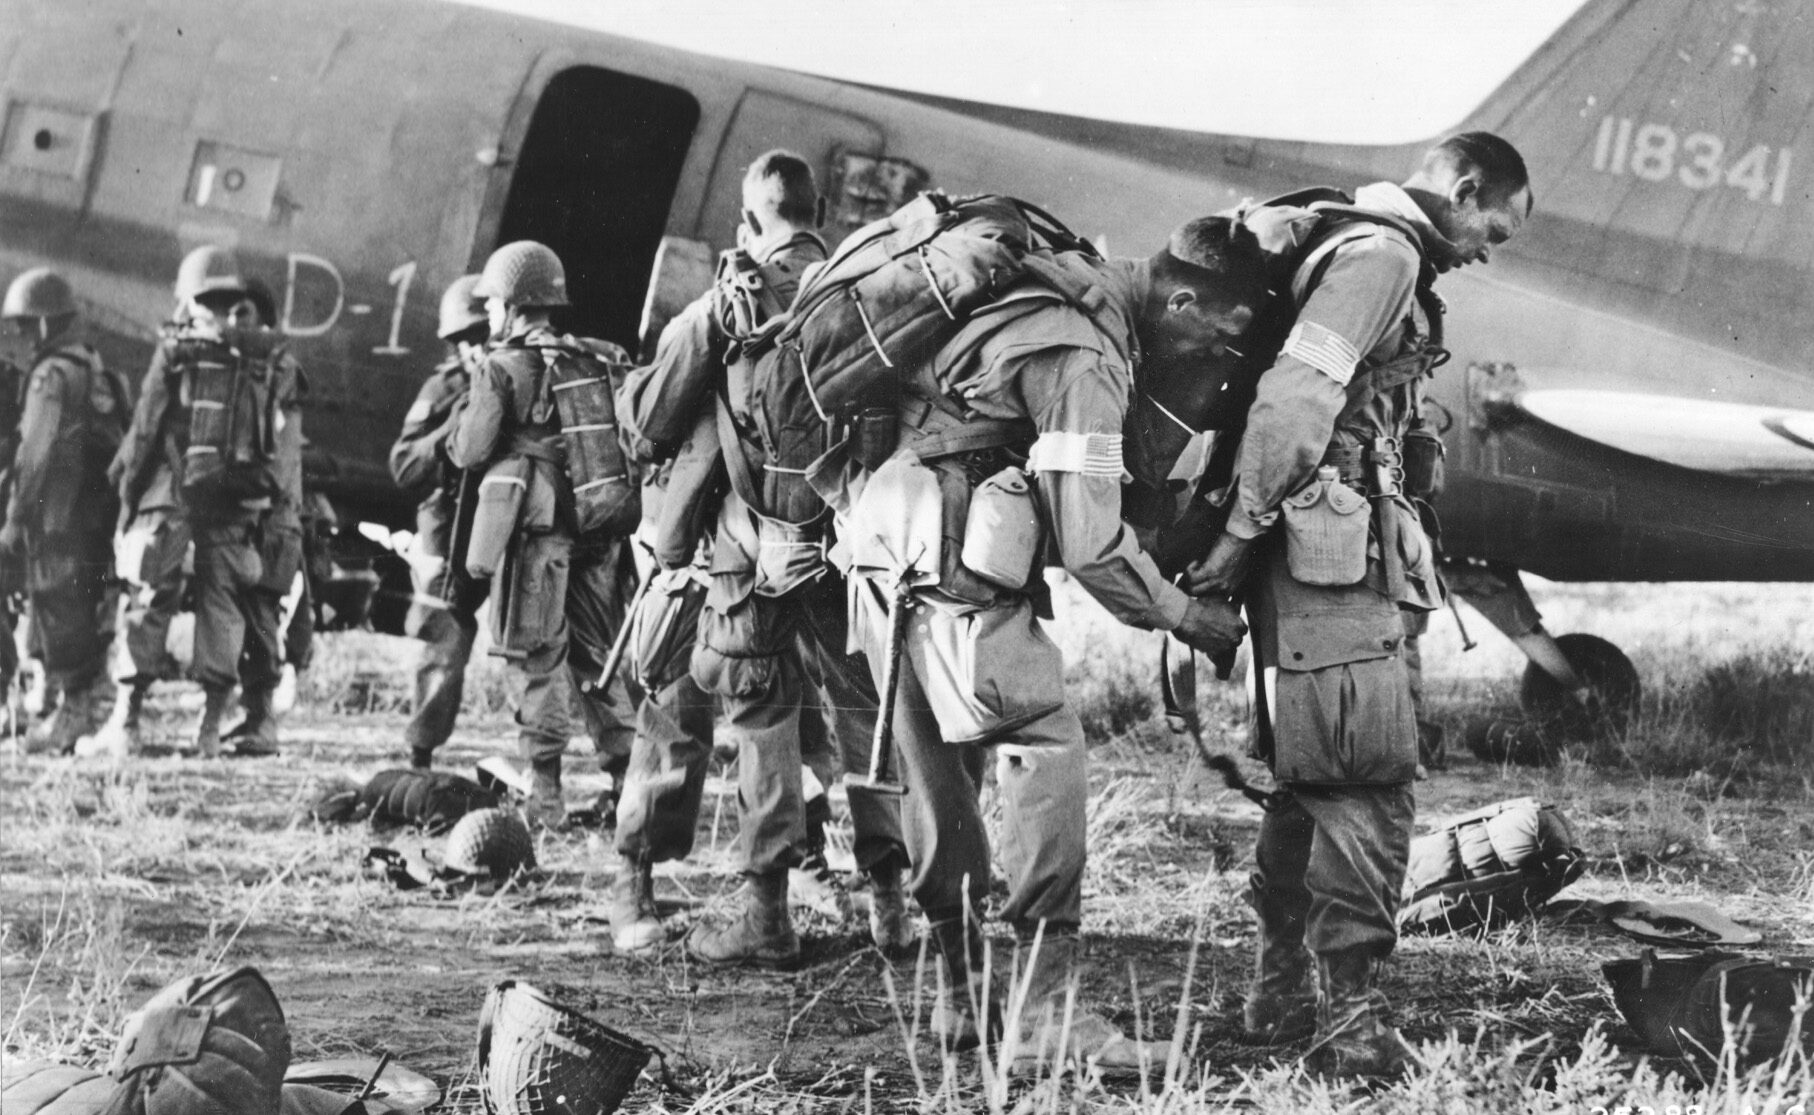 Weighed down by their heavy packs, paratroopers of the 82nd Airborne Division make  last-minute adjustments to their loads prior to boarding transport planes that will take them over  drop zones near the beaches of Salerno, Italy. 